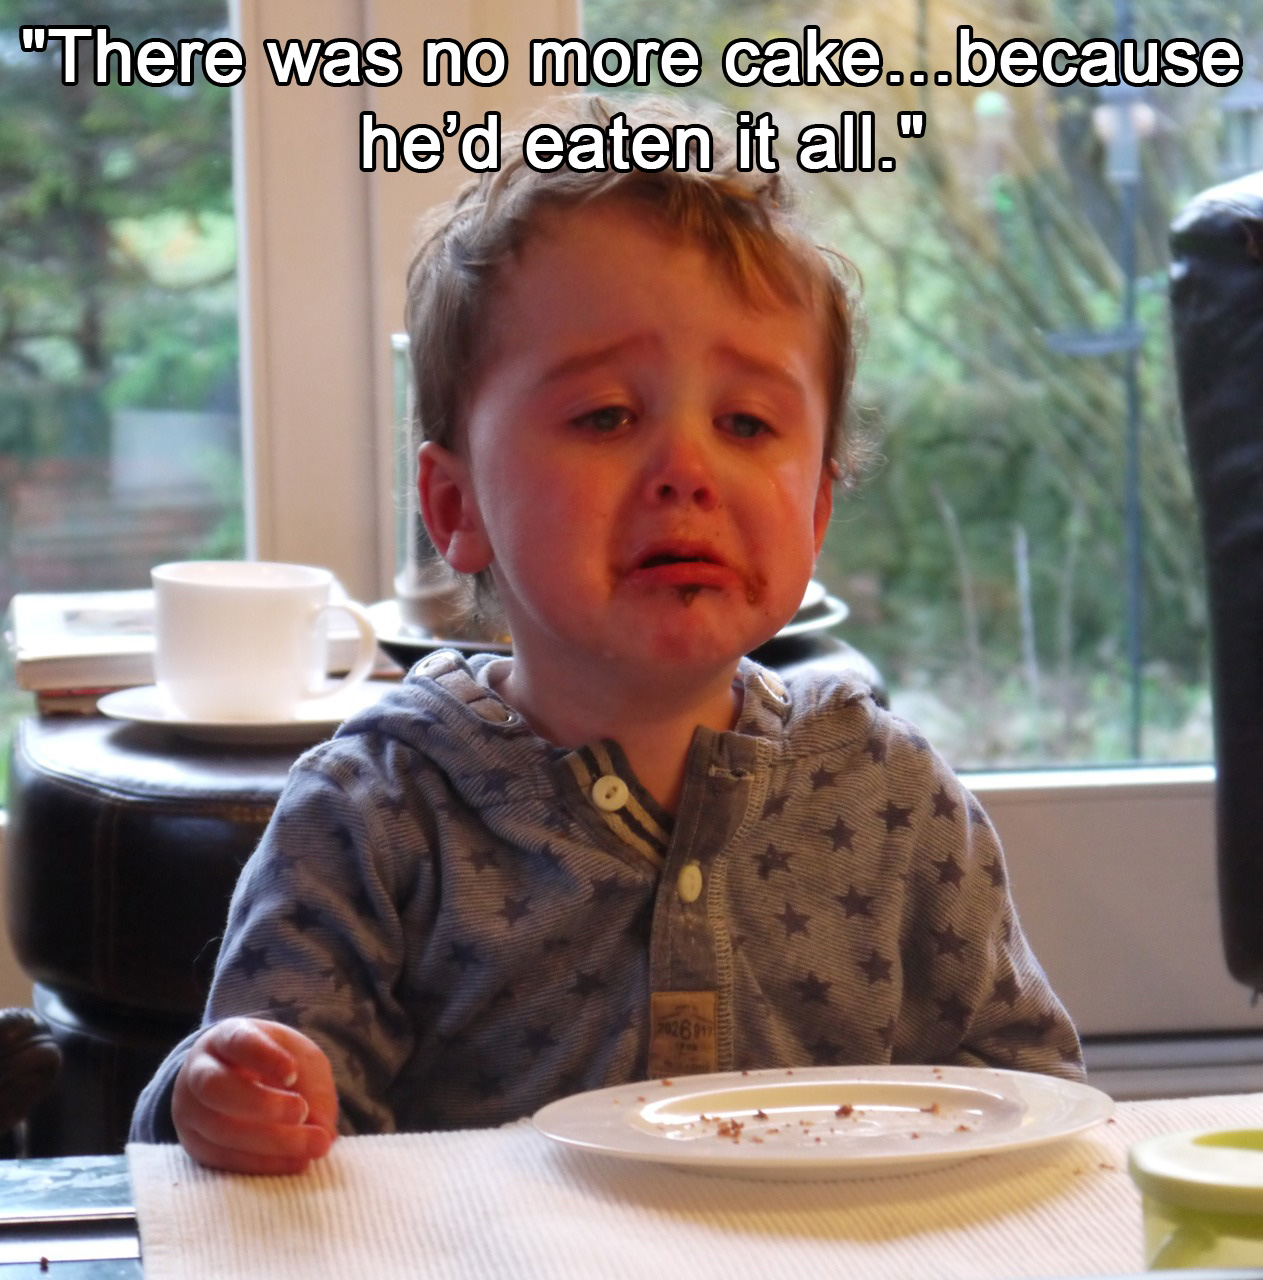 my kid is crying - "There was no more cake...because he'd eaten it all."